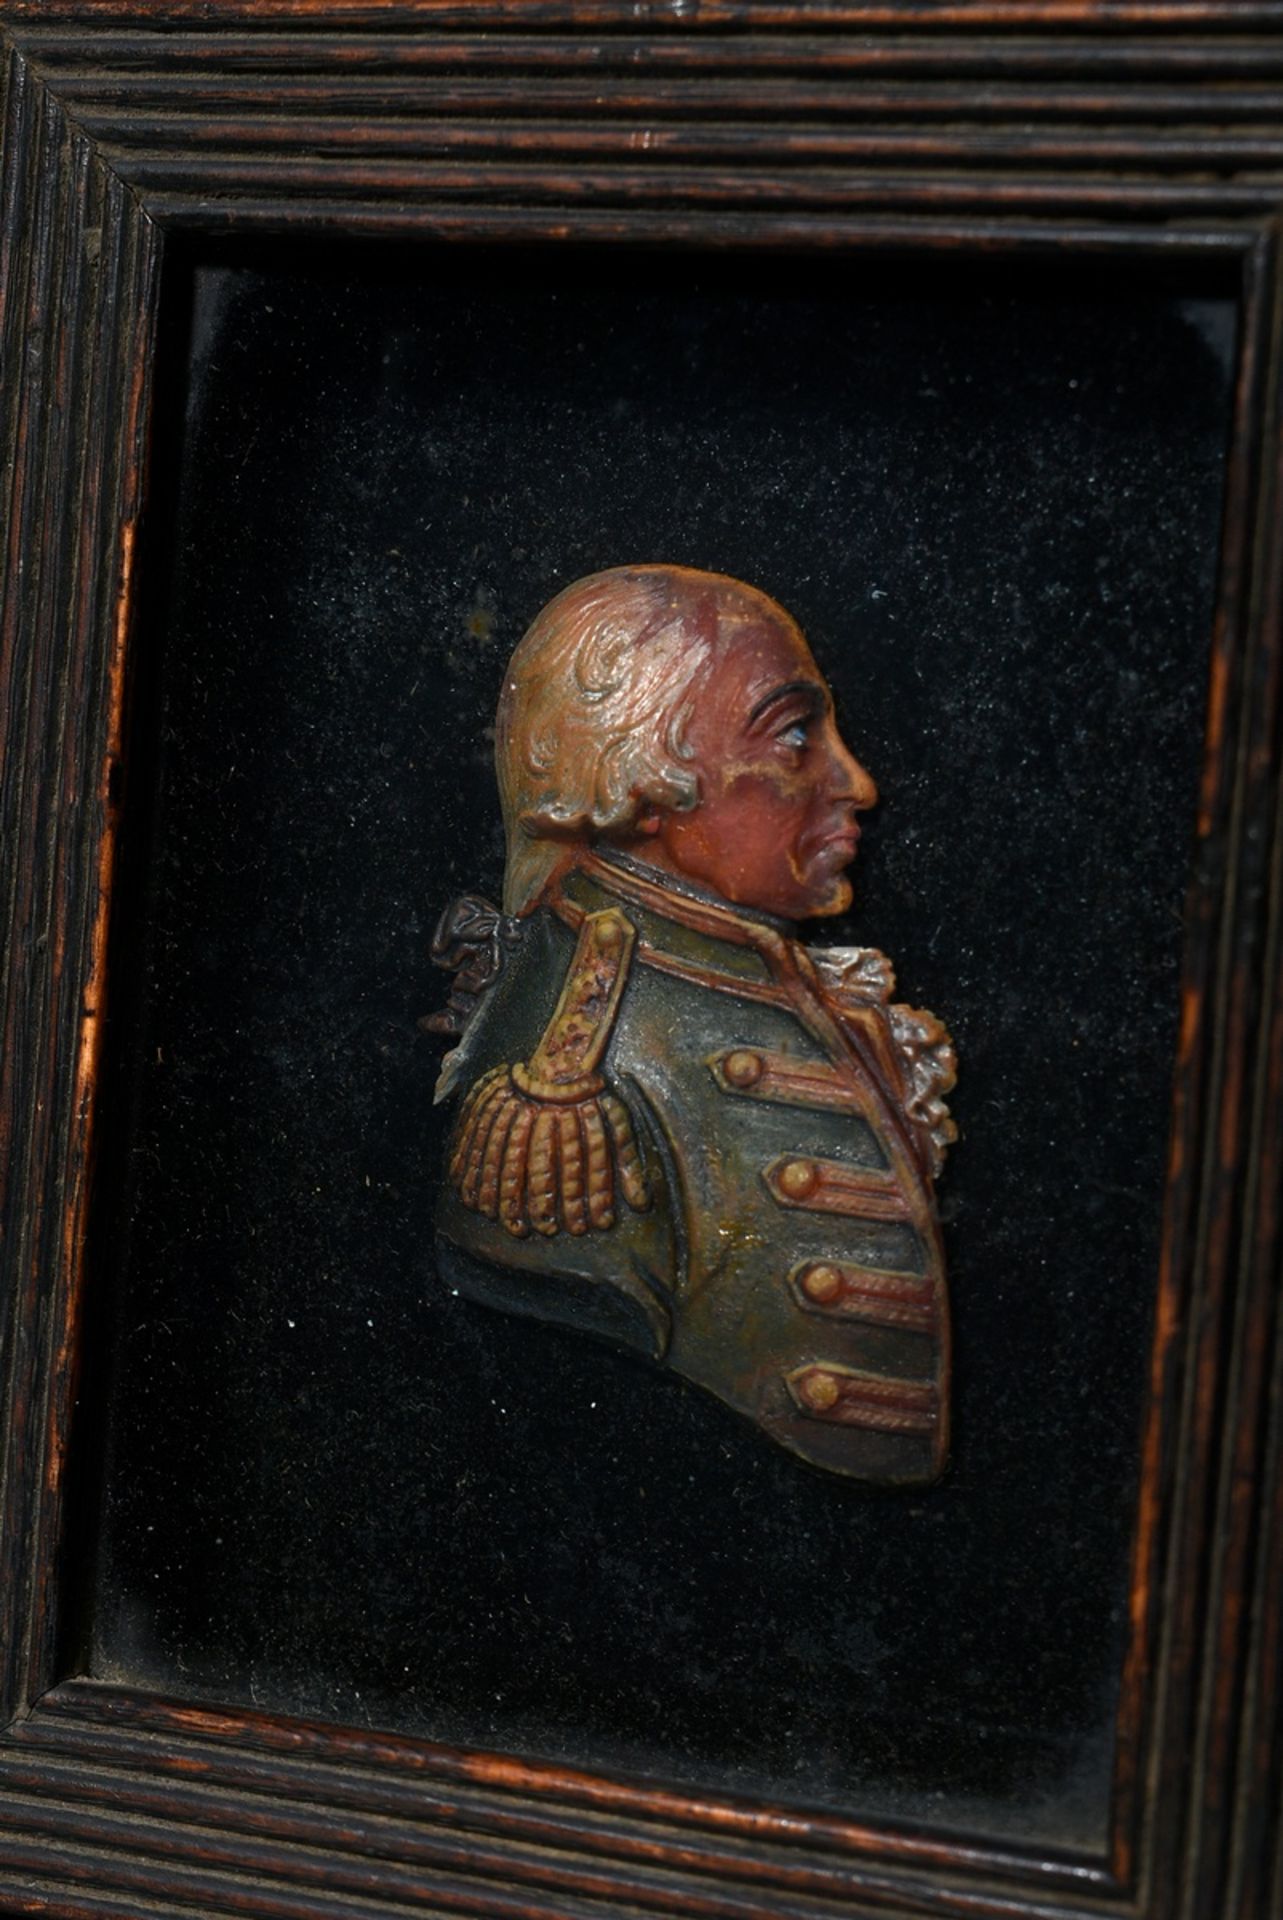 4 Various sculptural wax portraits in half relief: "Horatio Nelson, 1st Viscount Nelson (1758-1805) - Image 5 of 11